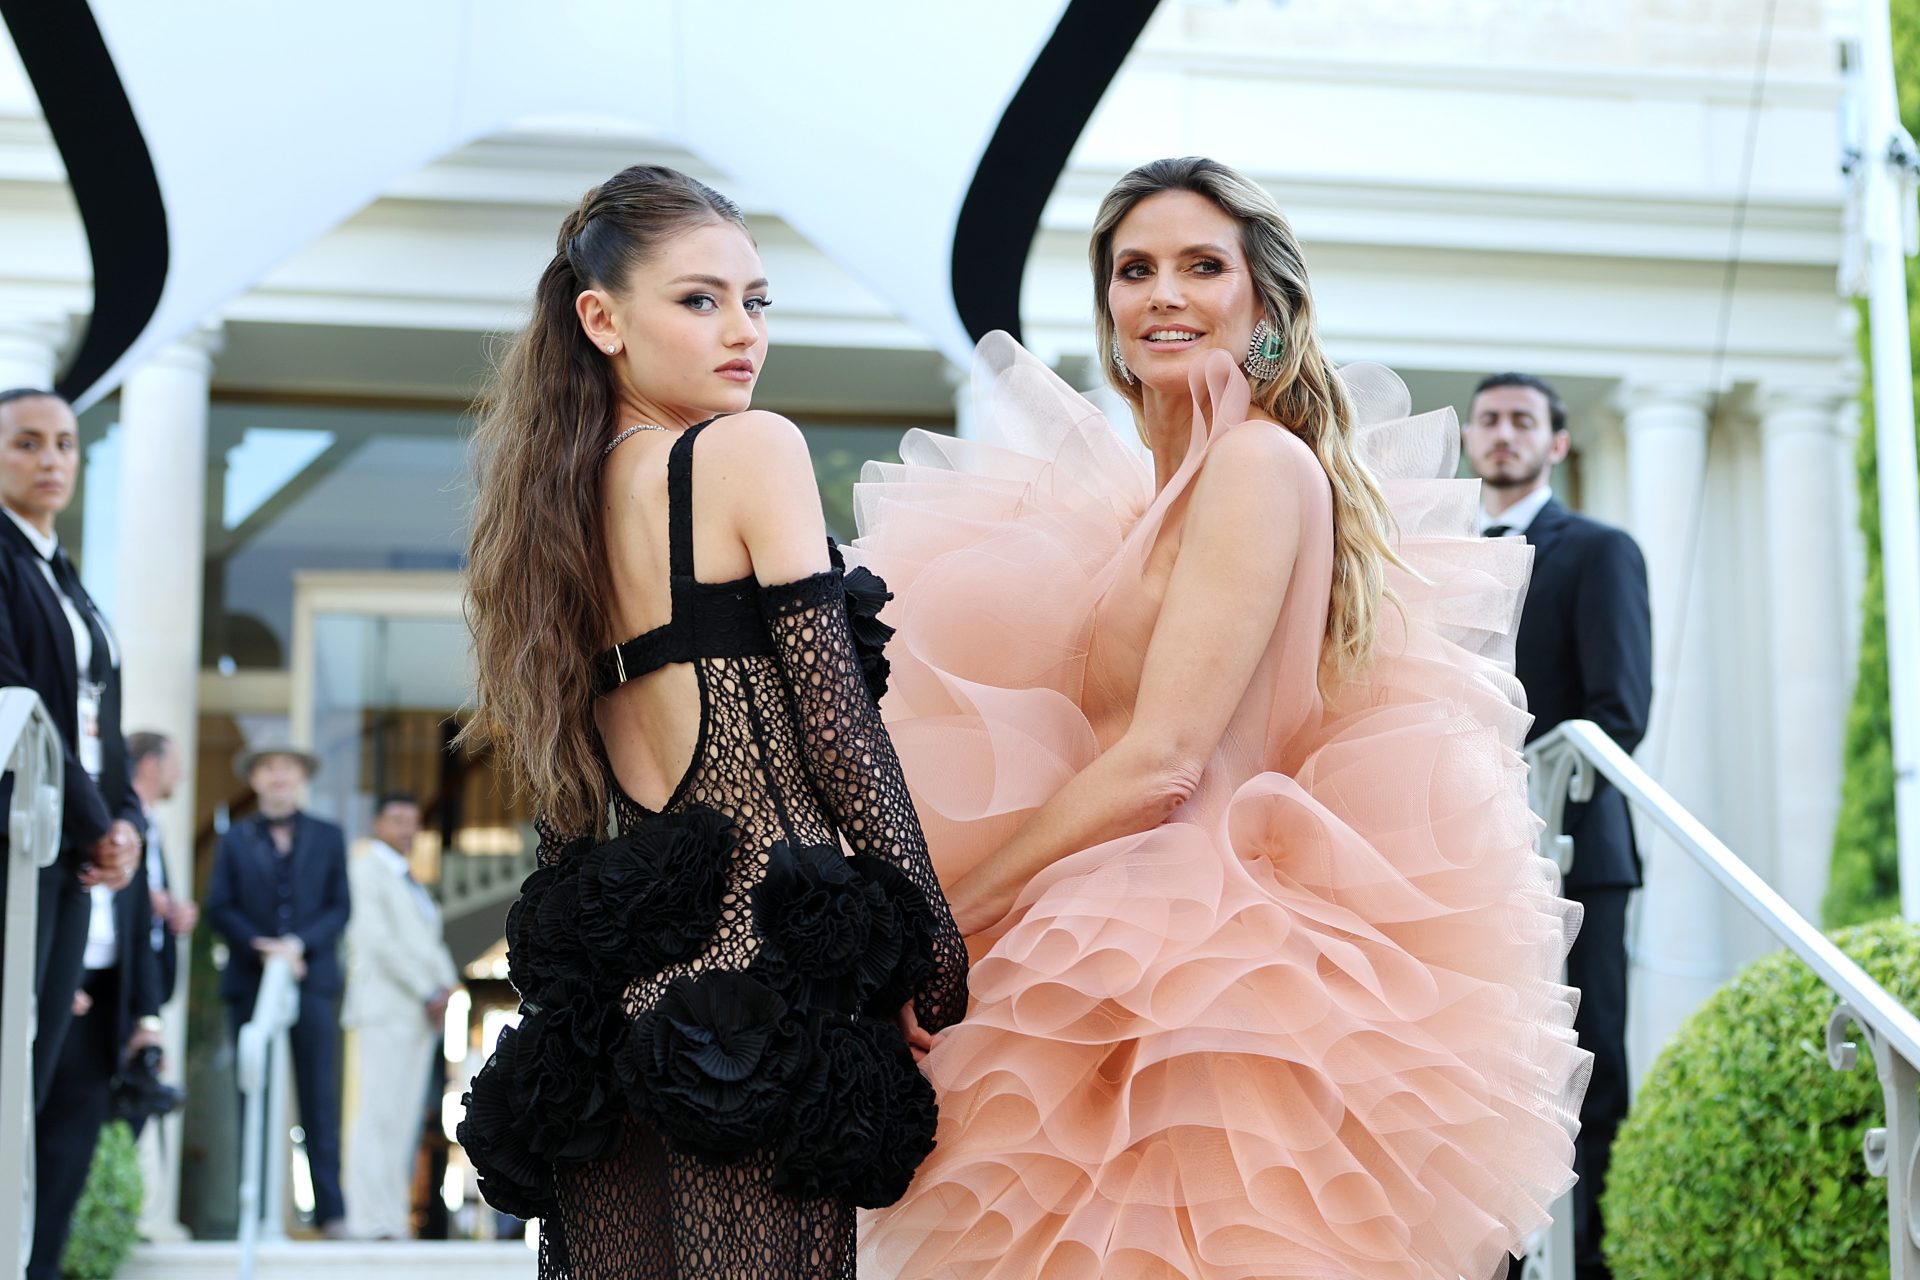 The children of celebrities on the Cannes red carpet